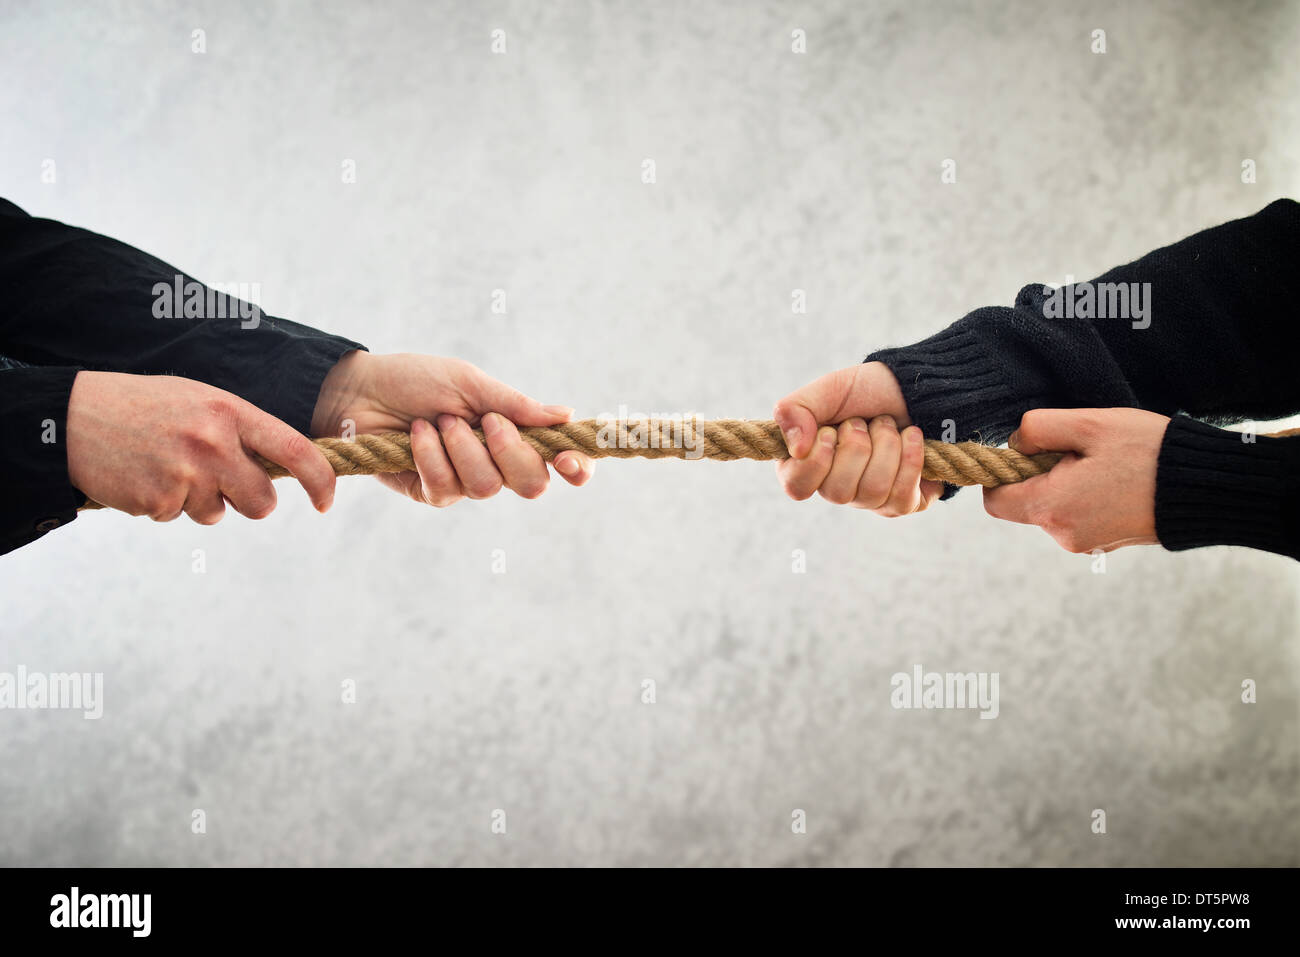 female hands pulling rope to opposite sides. Rivalry concept. Stock Photo